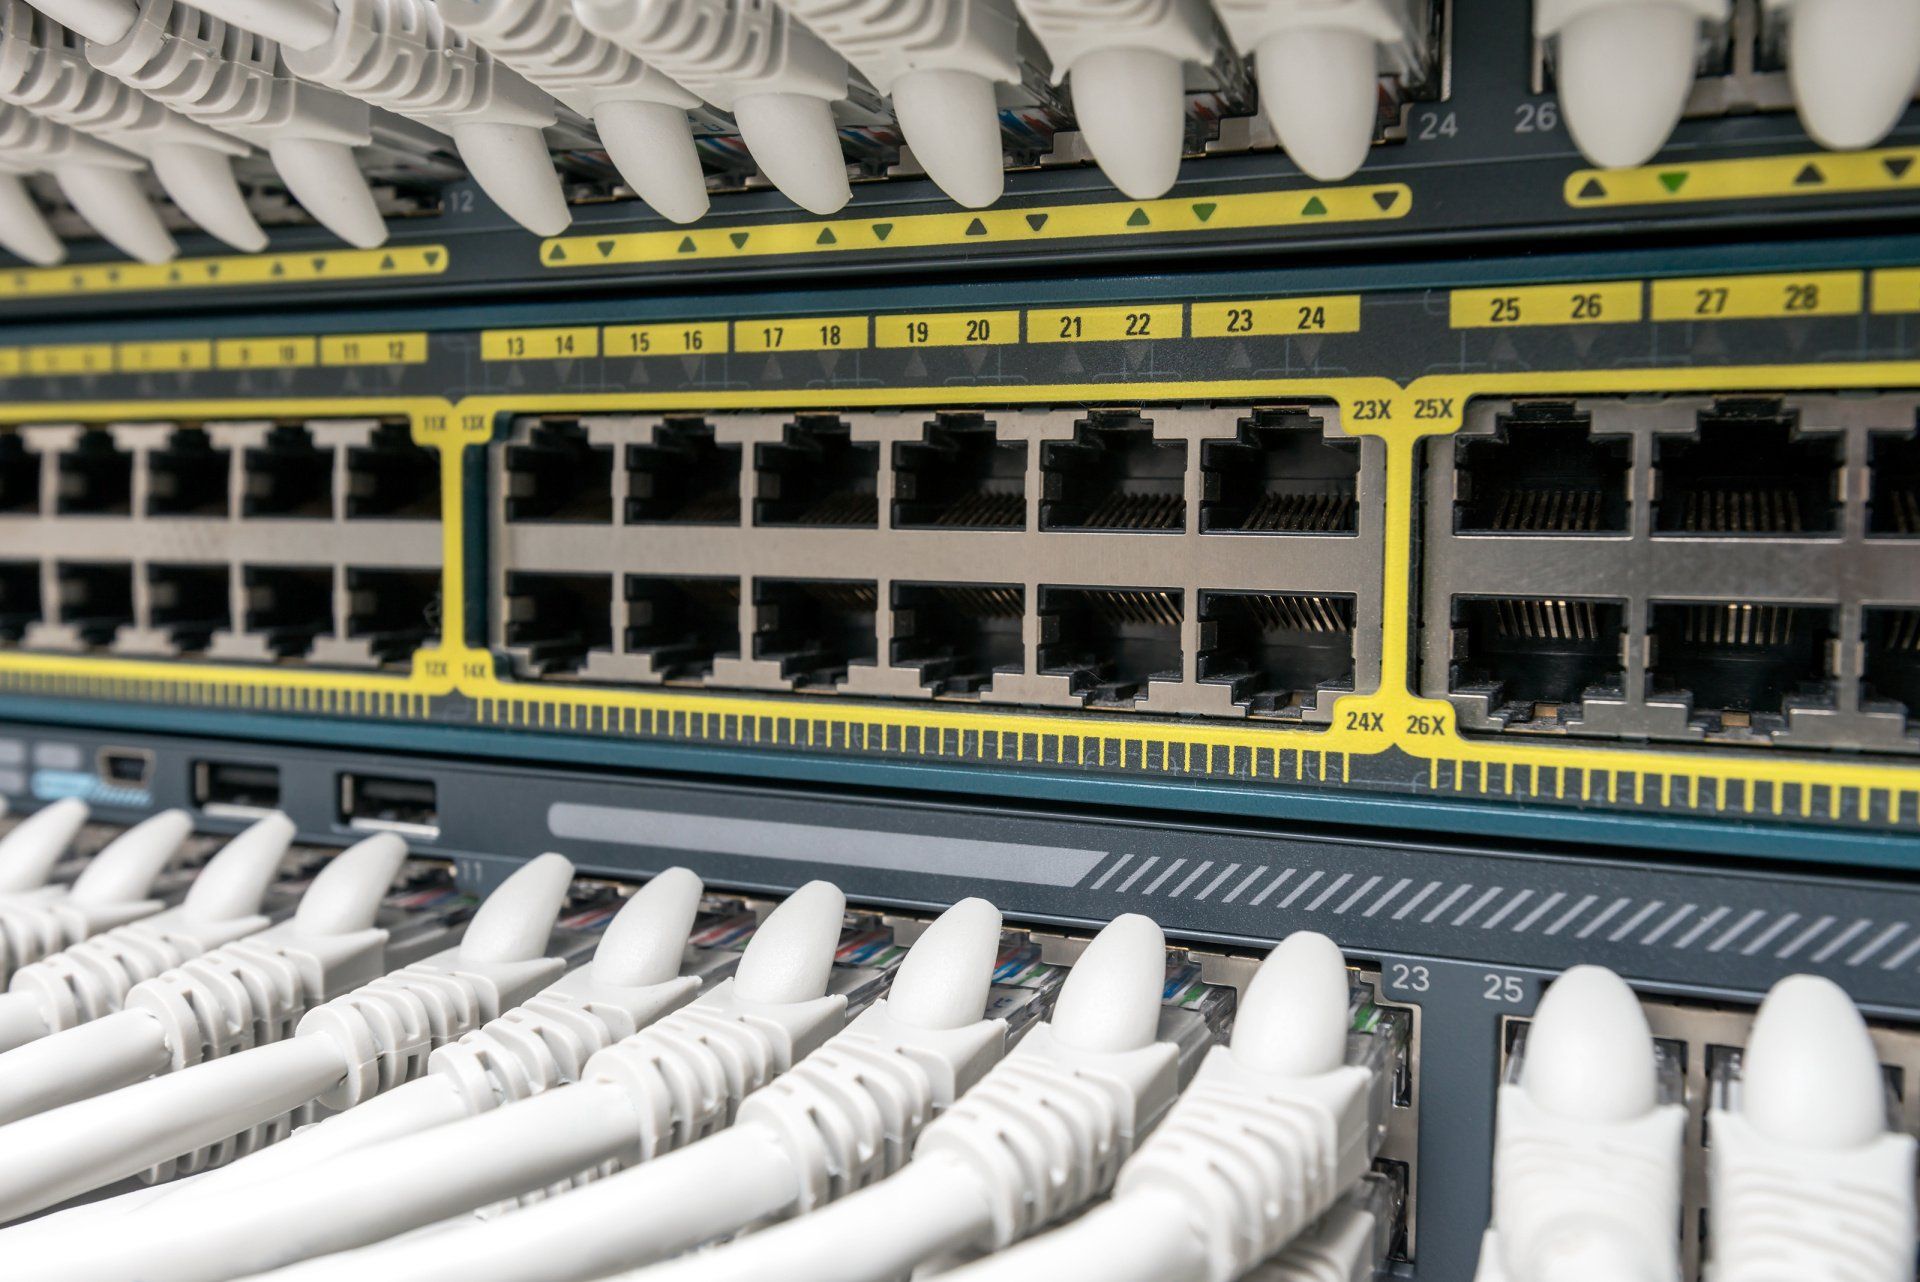 NTI structured cabling services